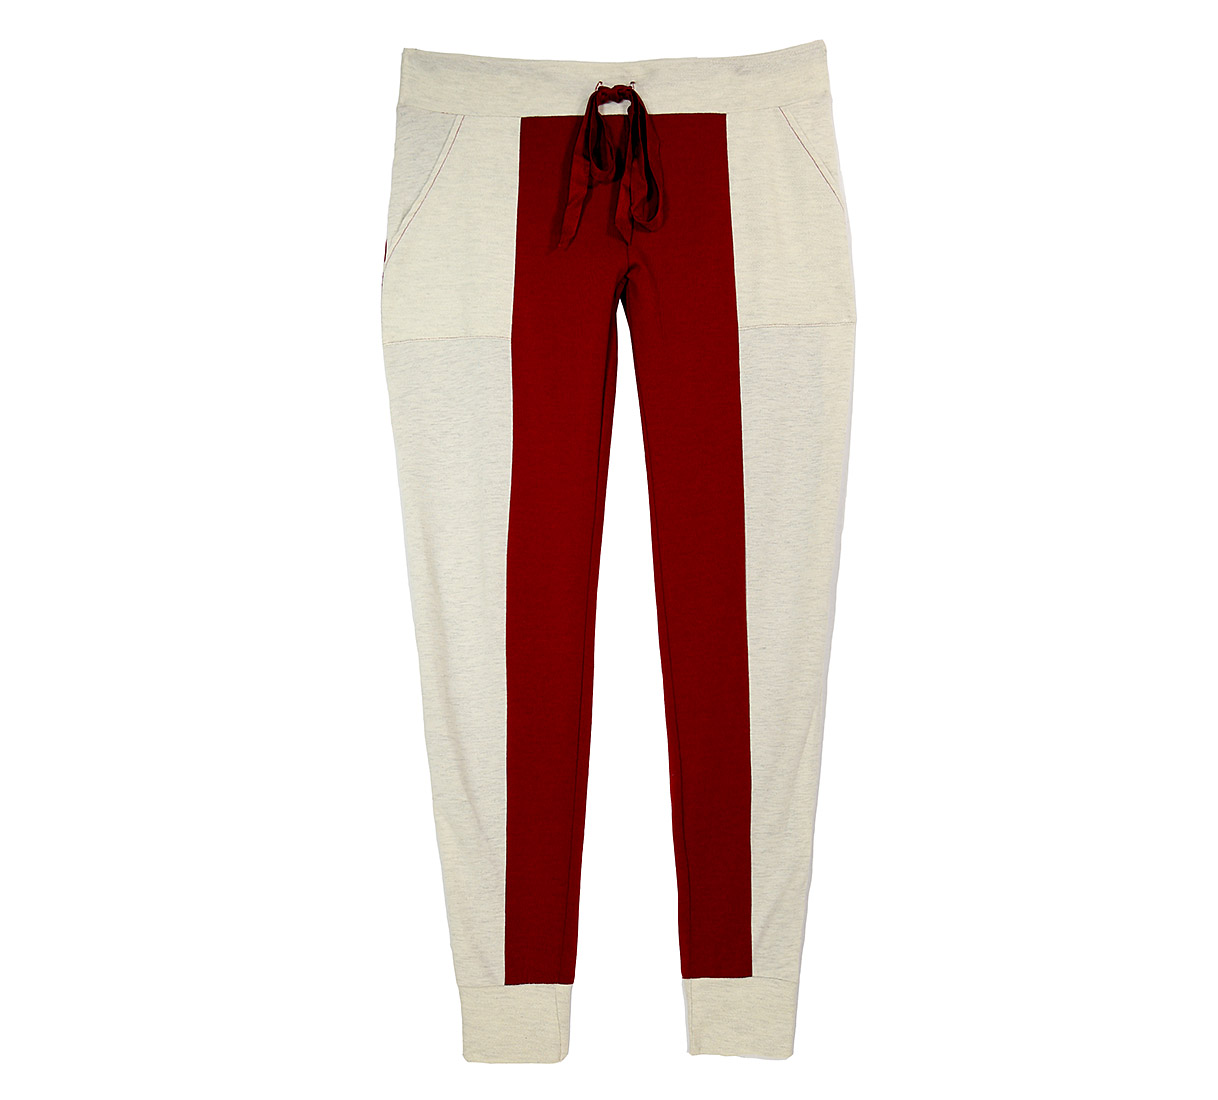 Make a Pass Oatmeal Oxblood (Sangria) Jogger | Color Blocked Warmups | Luxury Athleisure | Between the Sheets Loungewear